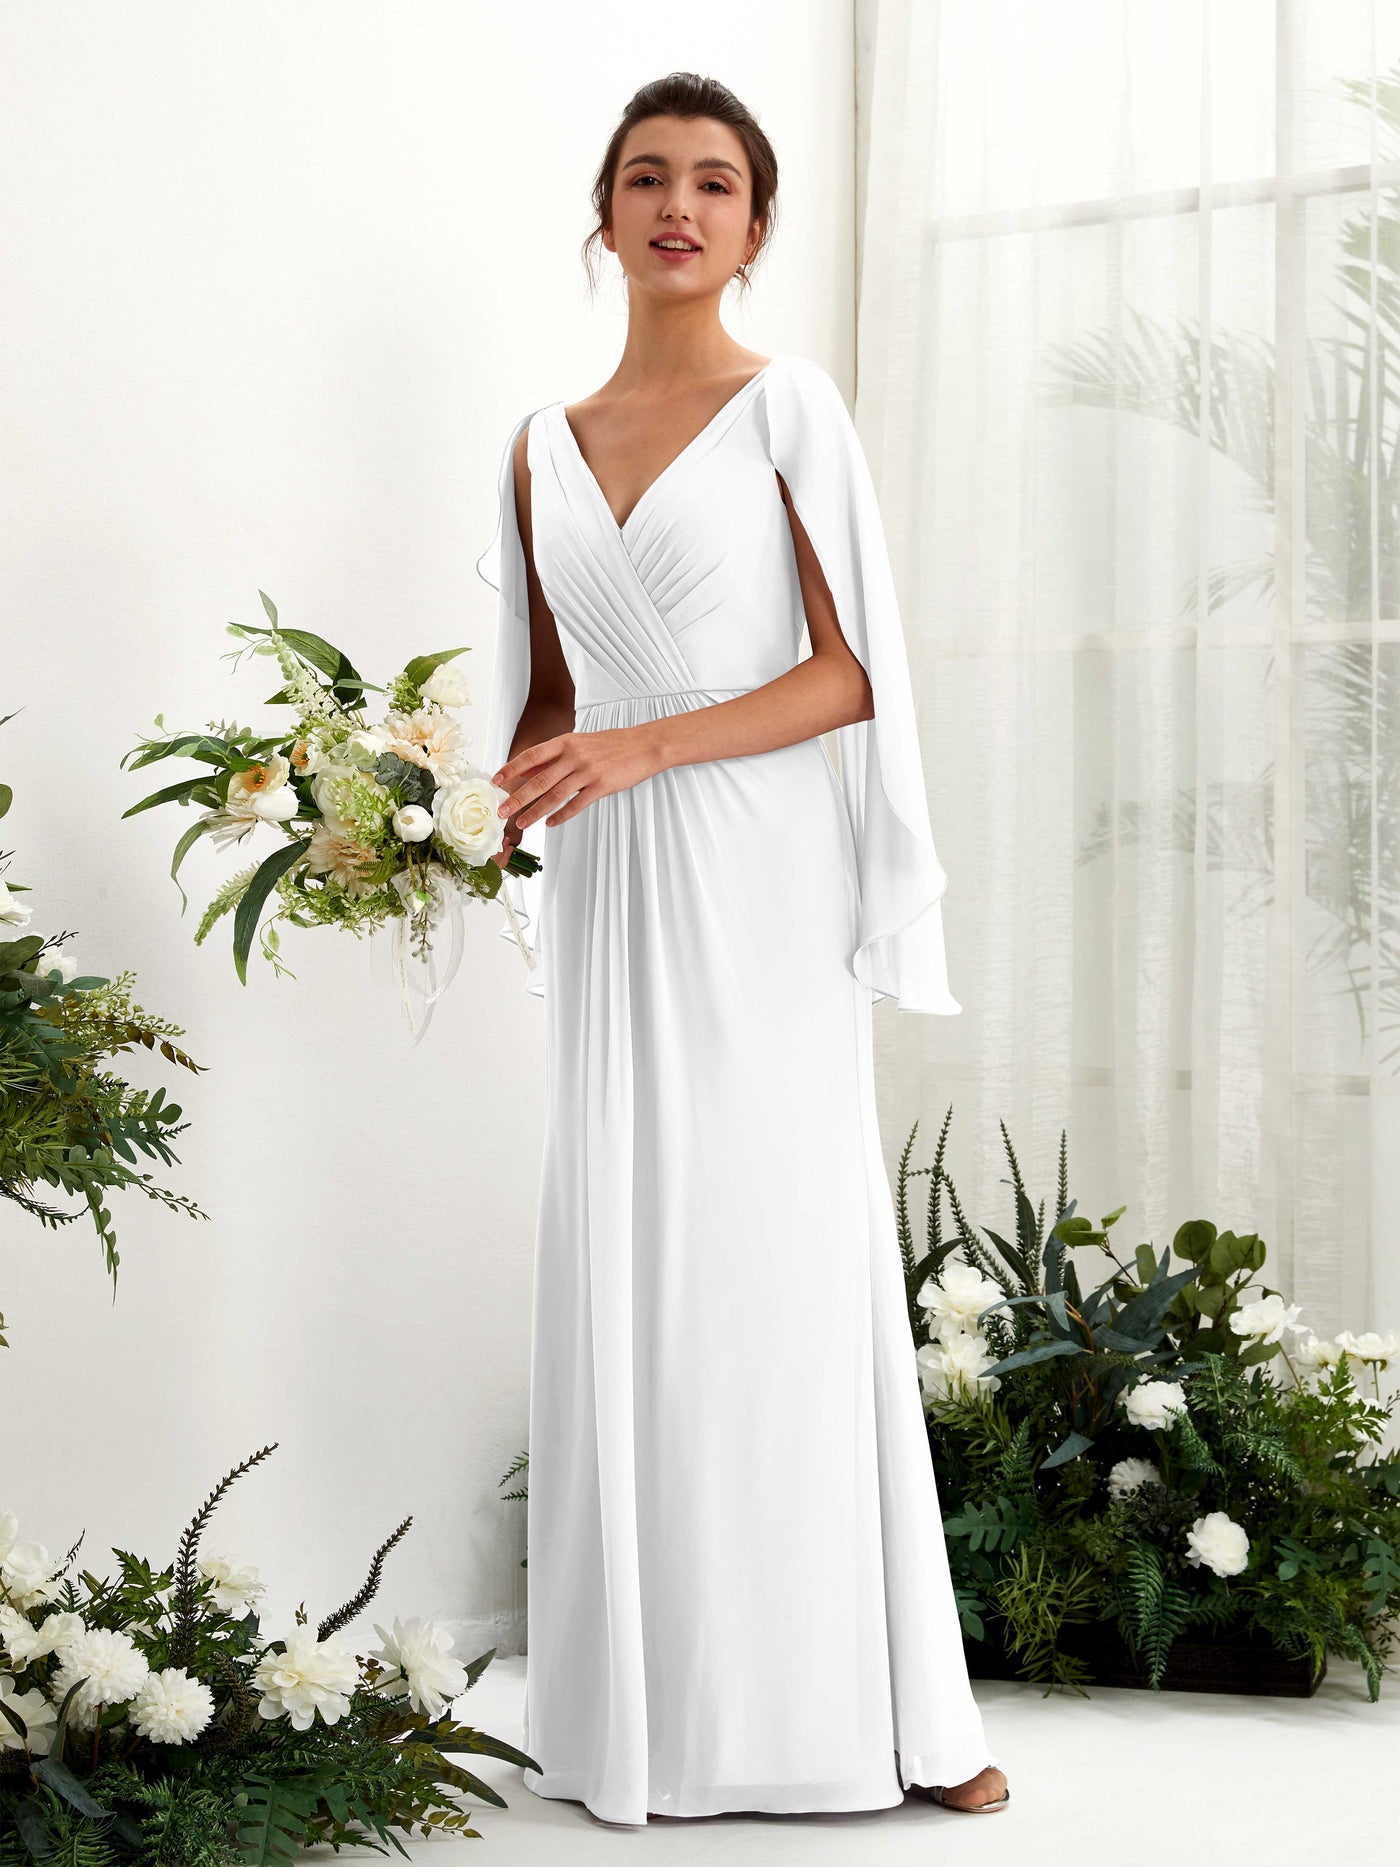 White Bridesmaid Dresses Bridesmaid Dress A-line Chiffon Straps Full Length Long Sleeves Wedding Party Dress (80220142)#color_white